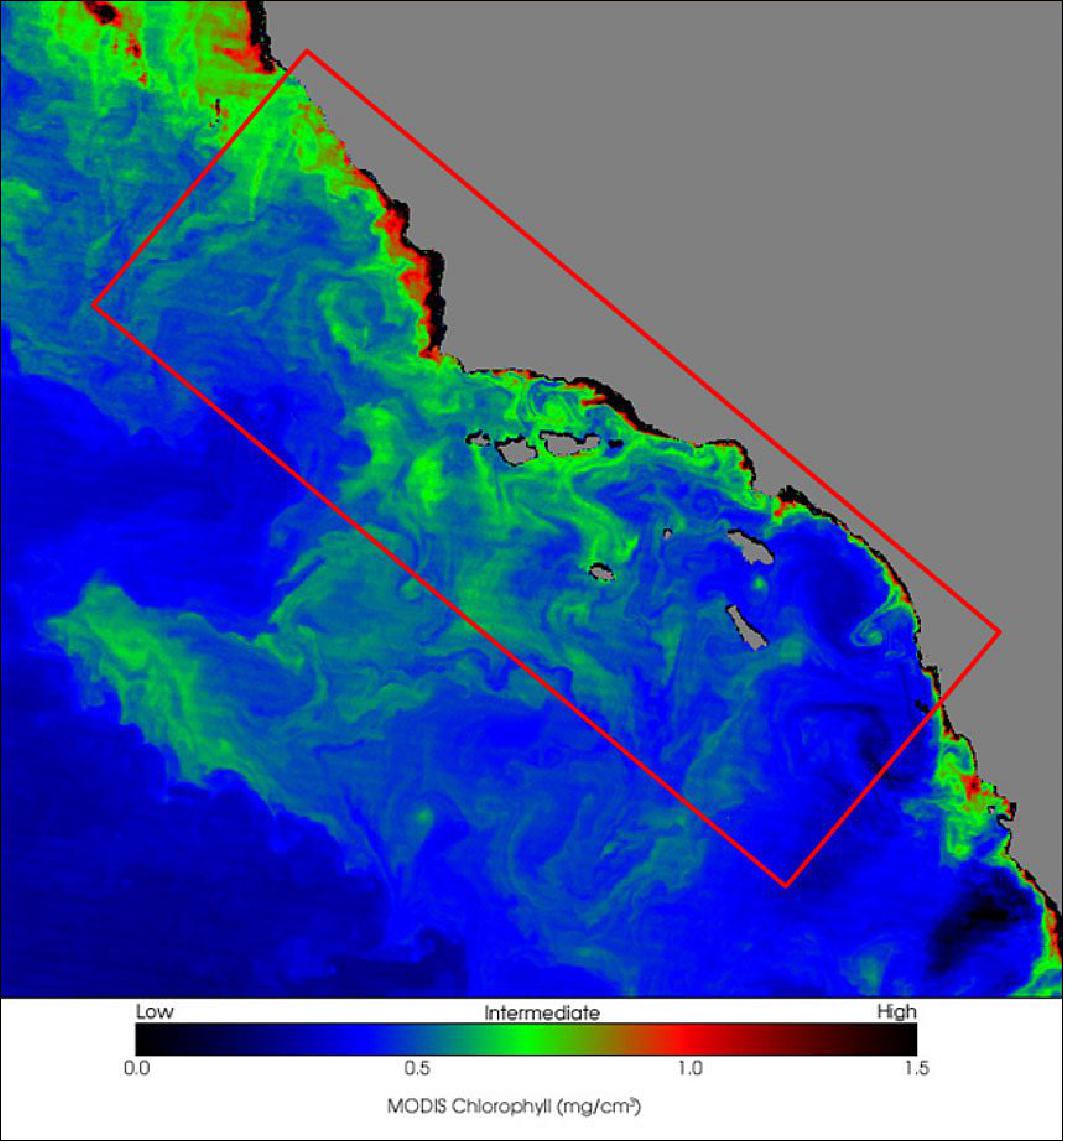 Figure 1: HawkEye field of view illustrated with a MODIS 4) image of the Santa Barbara channel. The field of view is approximately 350km cross-track from a 540km altitude via pushbroom scan of the 4080 pixel 120m spatial resolution linear arrays. MODIS: Moderate Resolution Imaging Spectroradiometer (image credit: Cloudland Instruments)